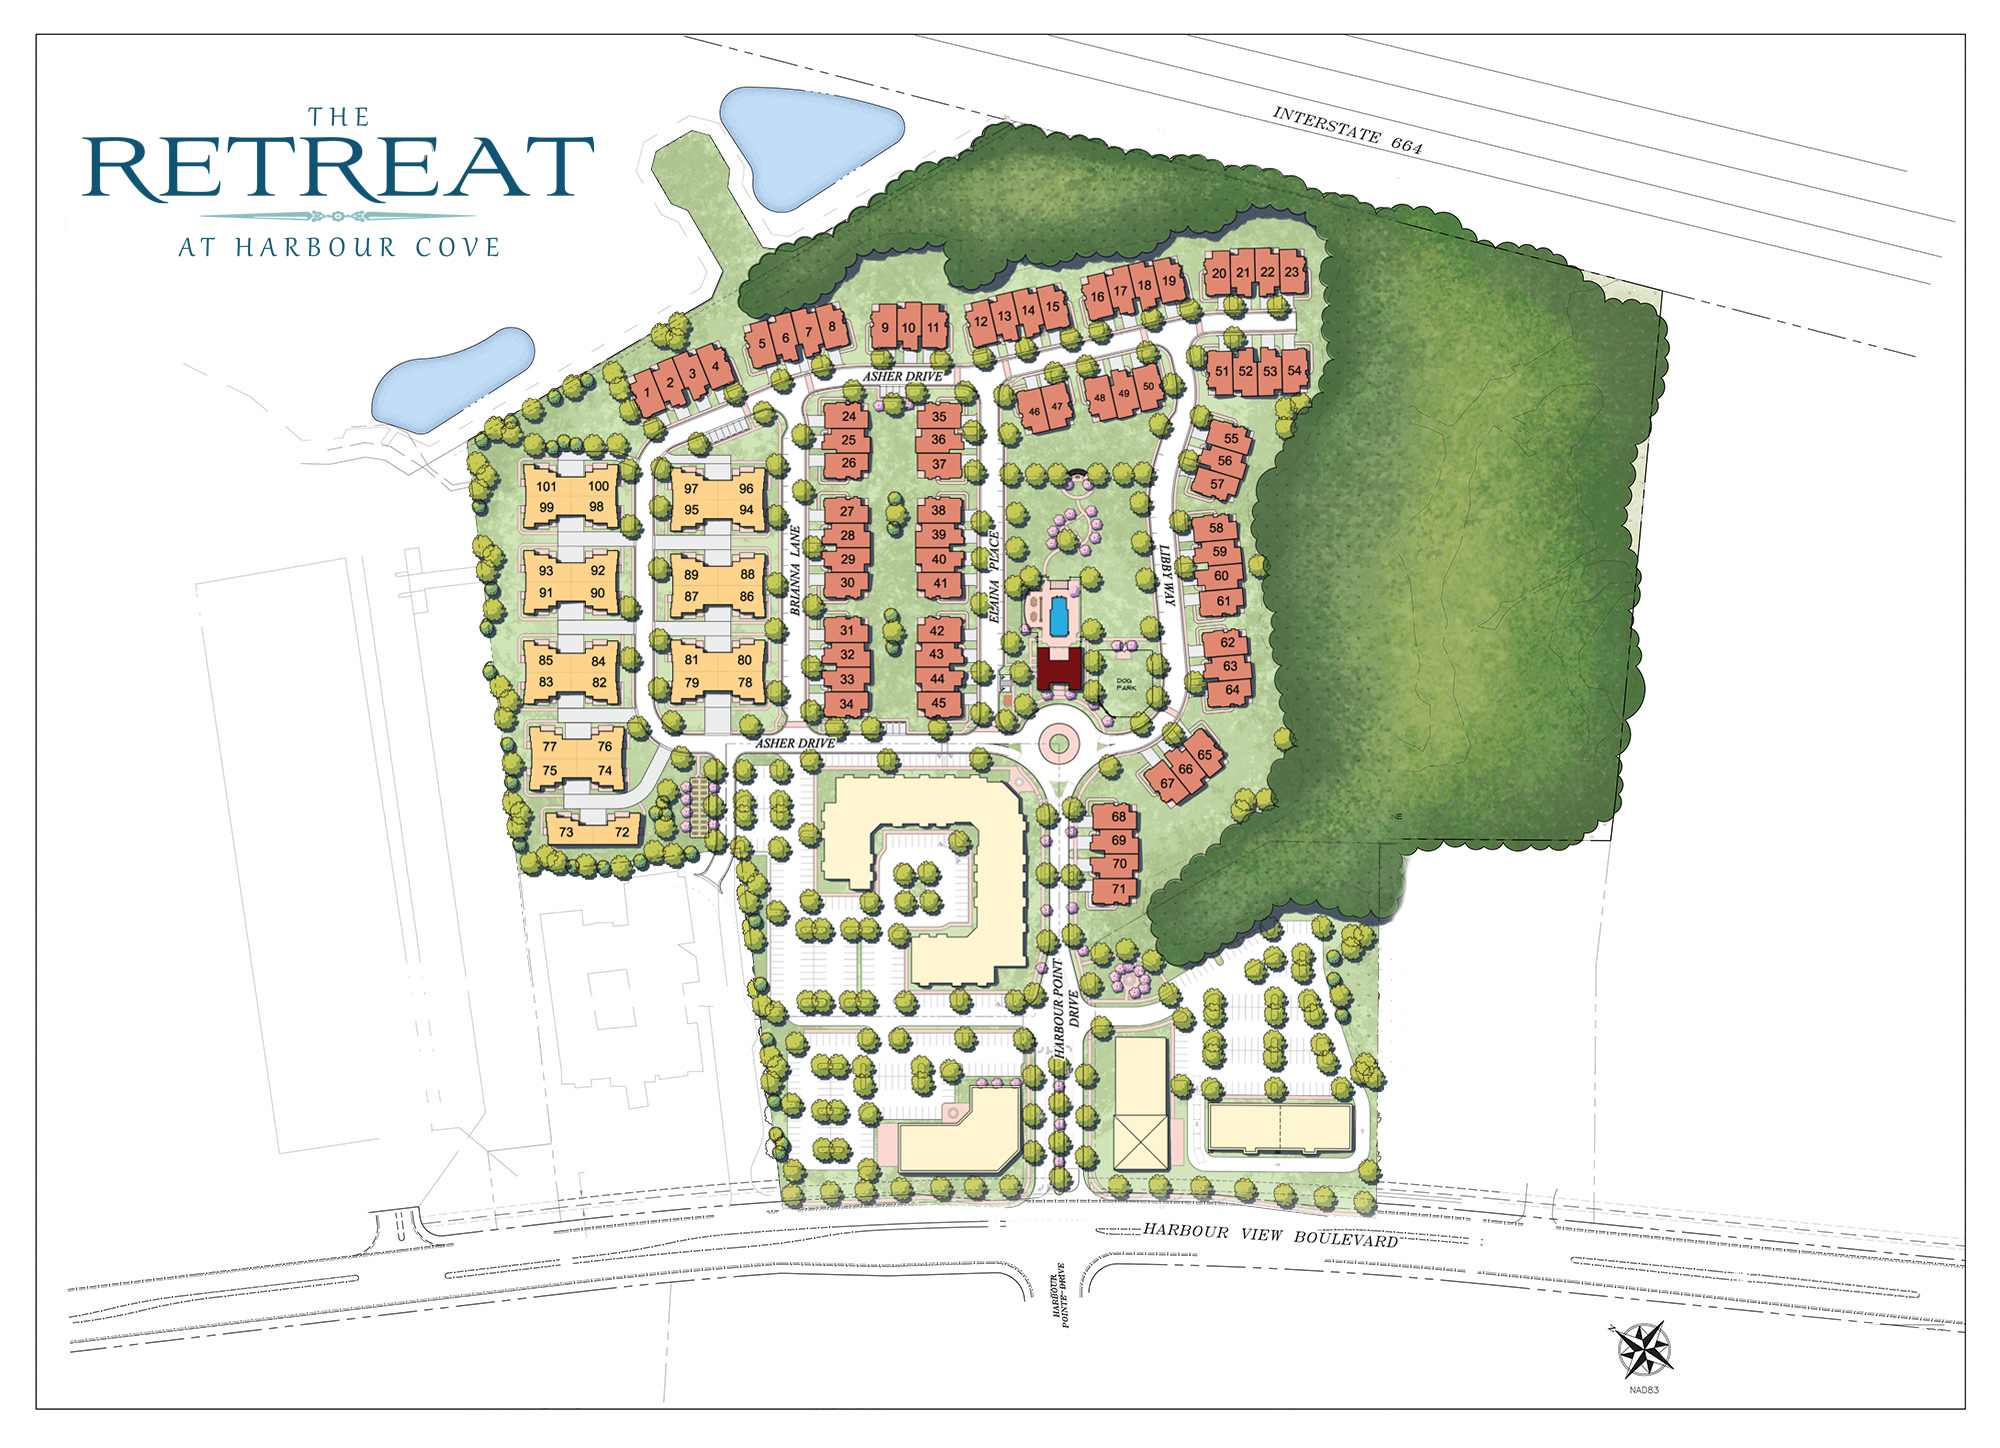 The Retreat at Harbour Cove site plan